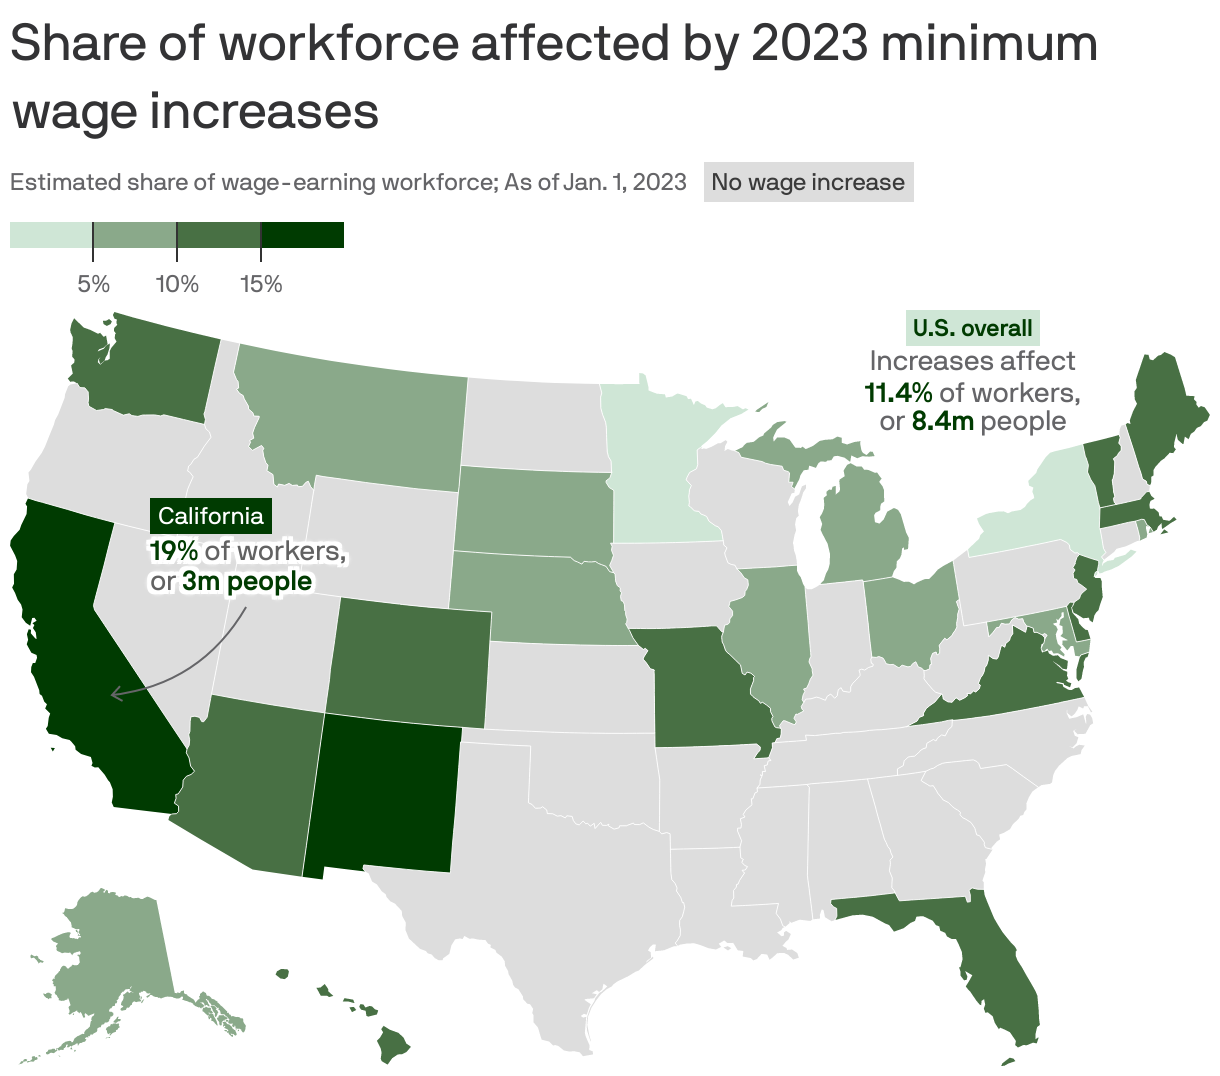 Share of workforce affected by 2023 minimum wage increases